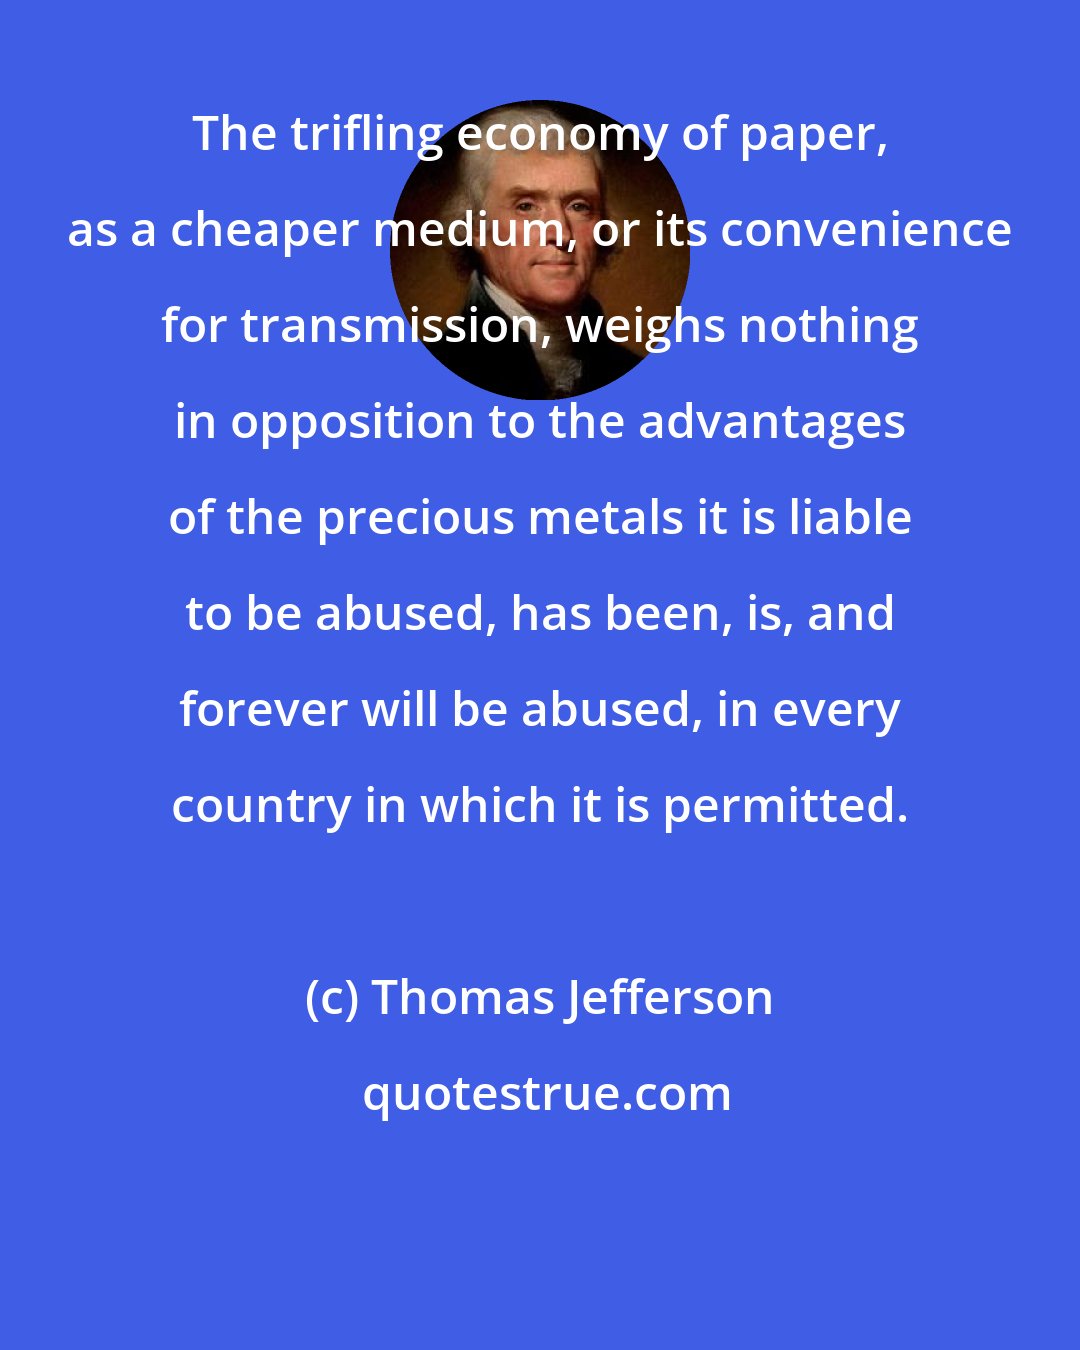 Thomas Jefferson: The trifling economy of paper, as a cheaper medium, or its convenience for transmission, weighs nothing in opposition to the advantages of the precious metals it is liable to be abused, has been, is, and forever will be abused, in every country in which it is permitted.